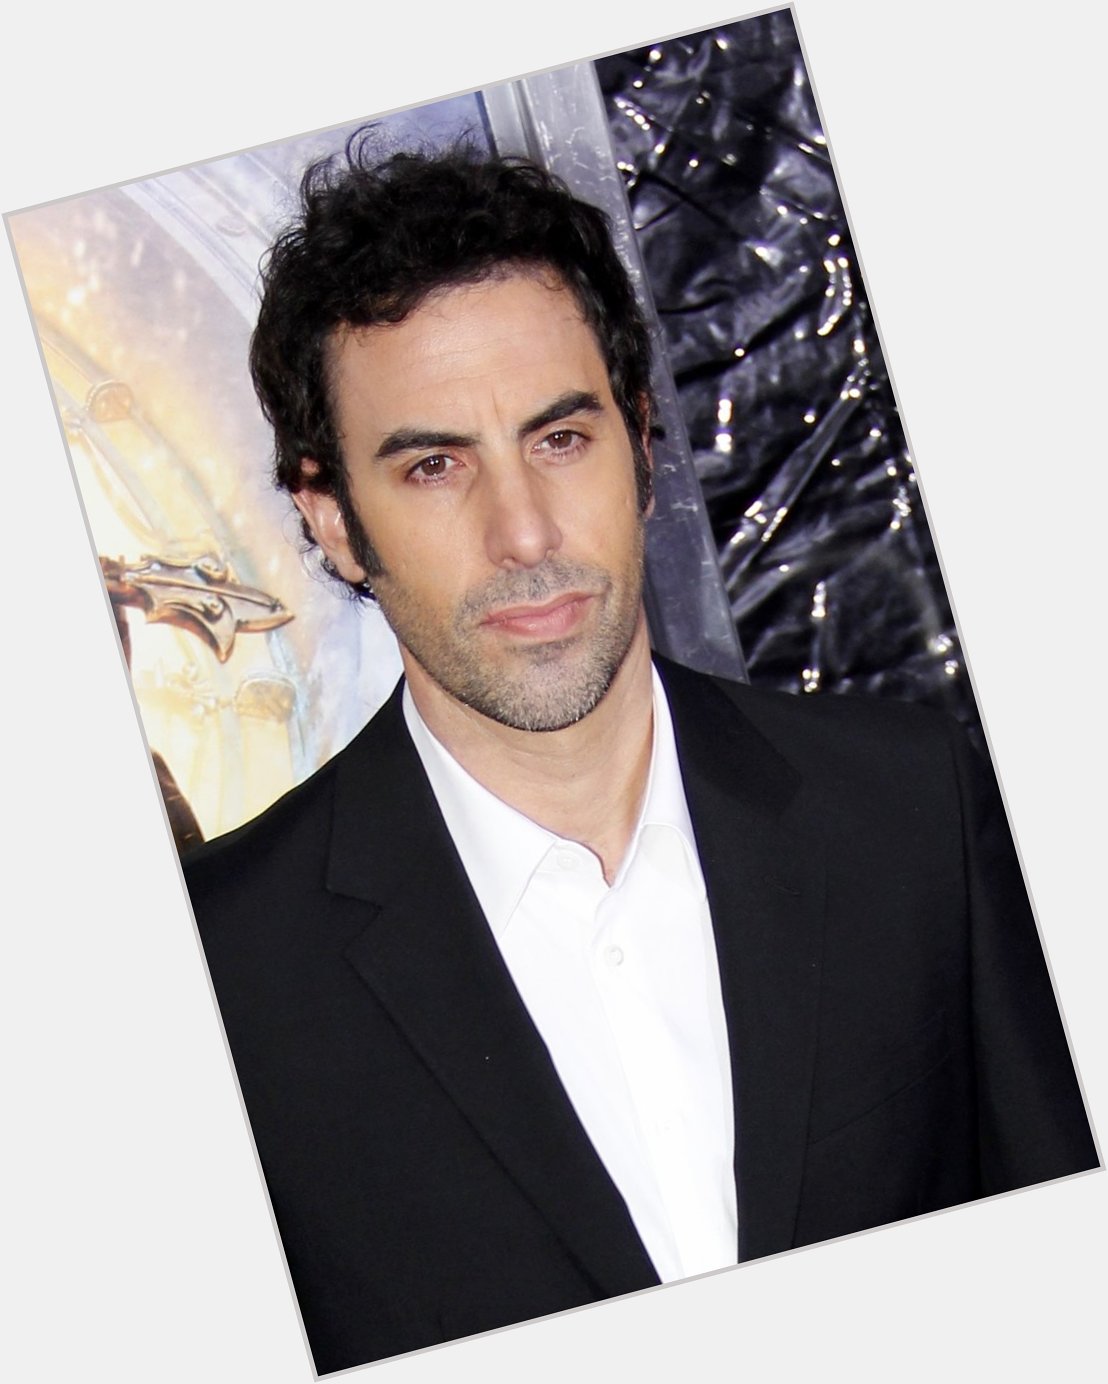 Happy Birthday Sacha Baron Cohen!! Whose exited for the new movie? 